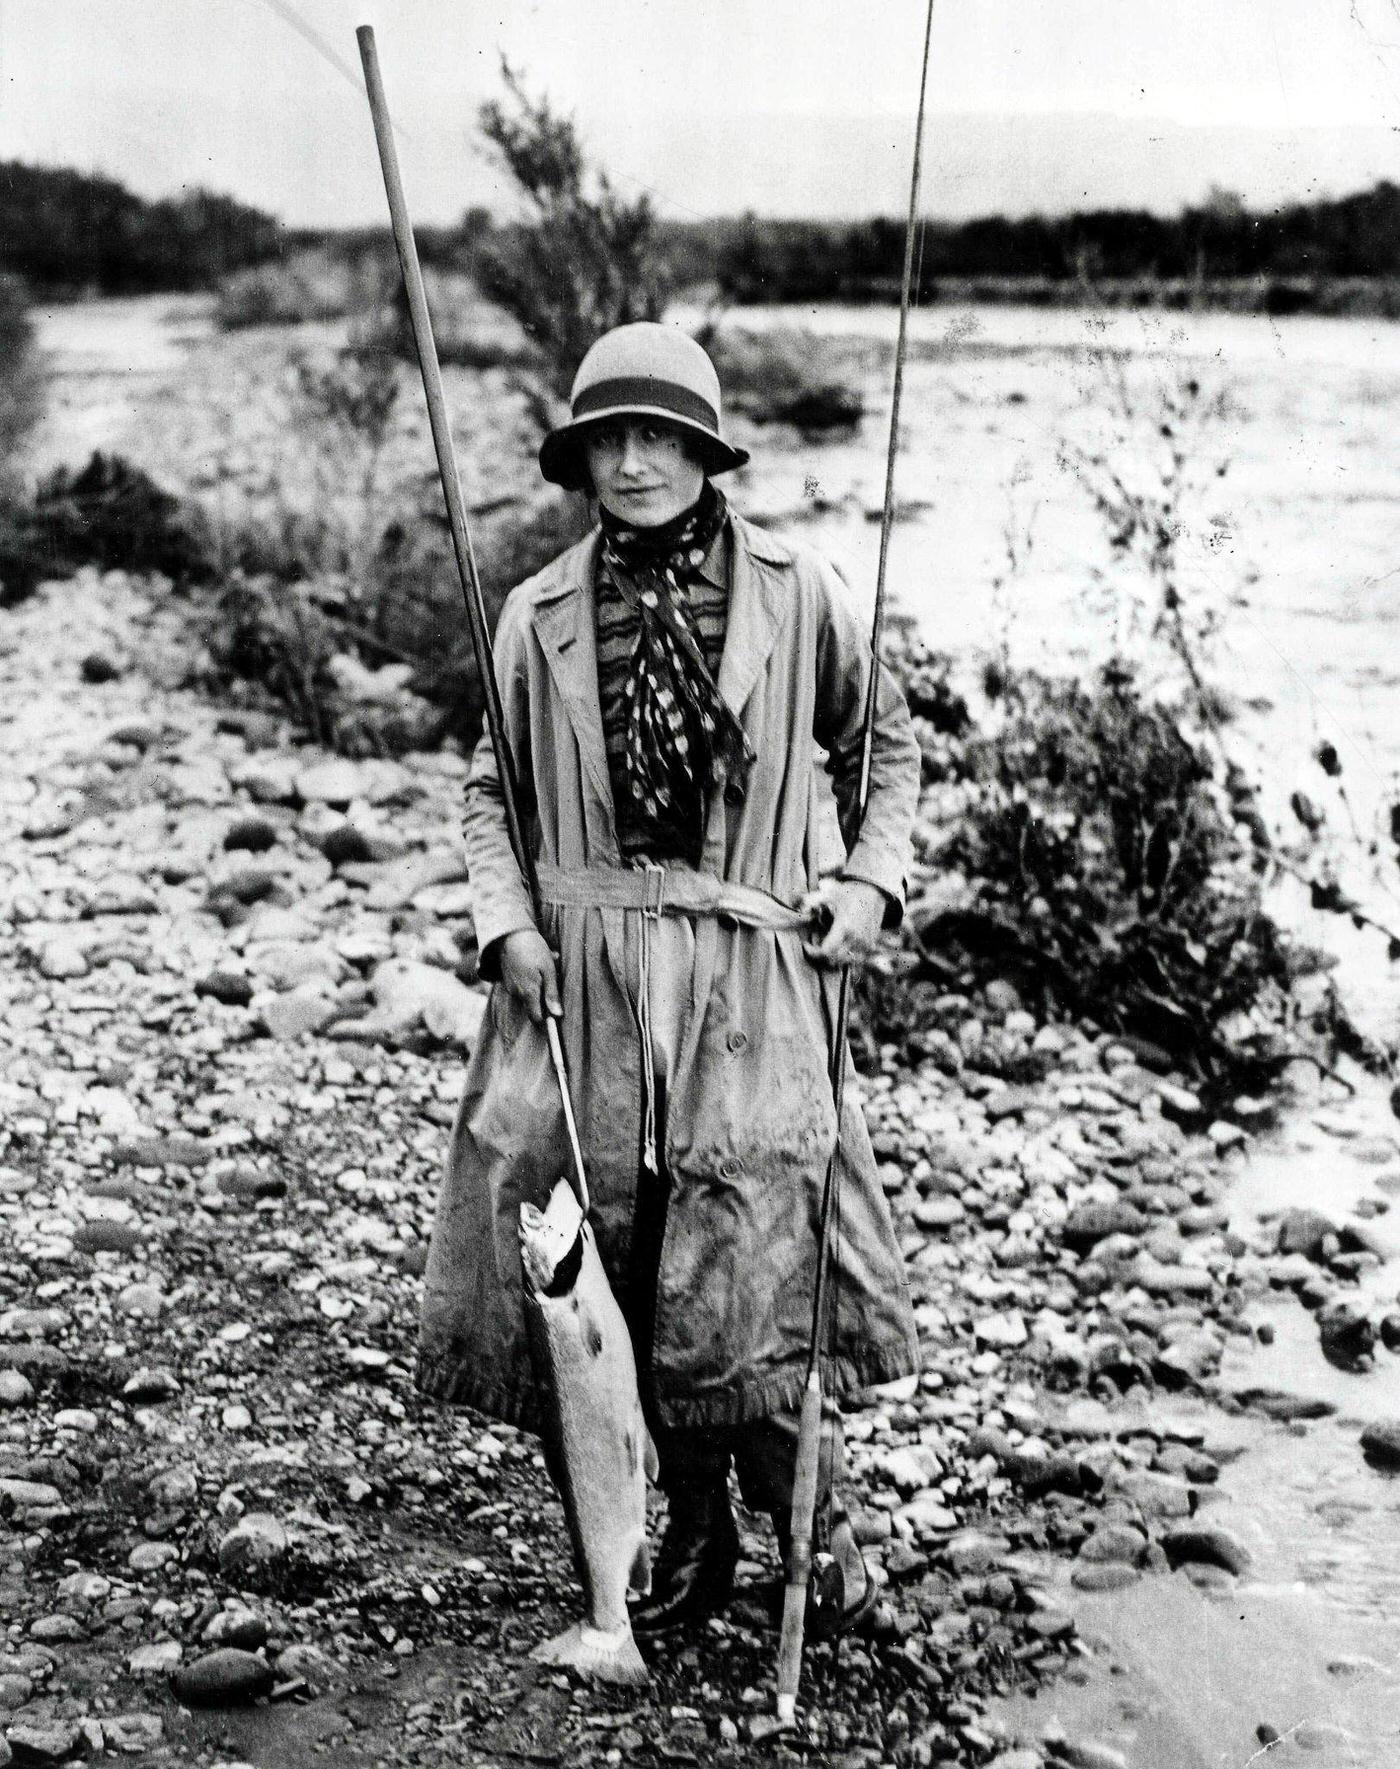 Queen Mother Fishing: Royal tour of Australia and New Zealand, 1927, the Queen Mother, then the Duchess of York, holding a salmon she had caught after a fishing expedition at Tokaanu, New Zealand.